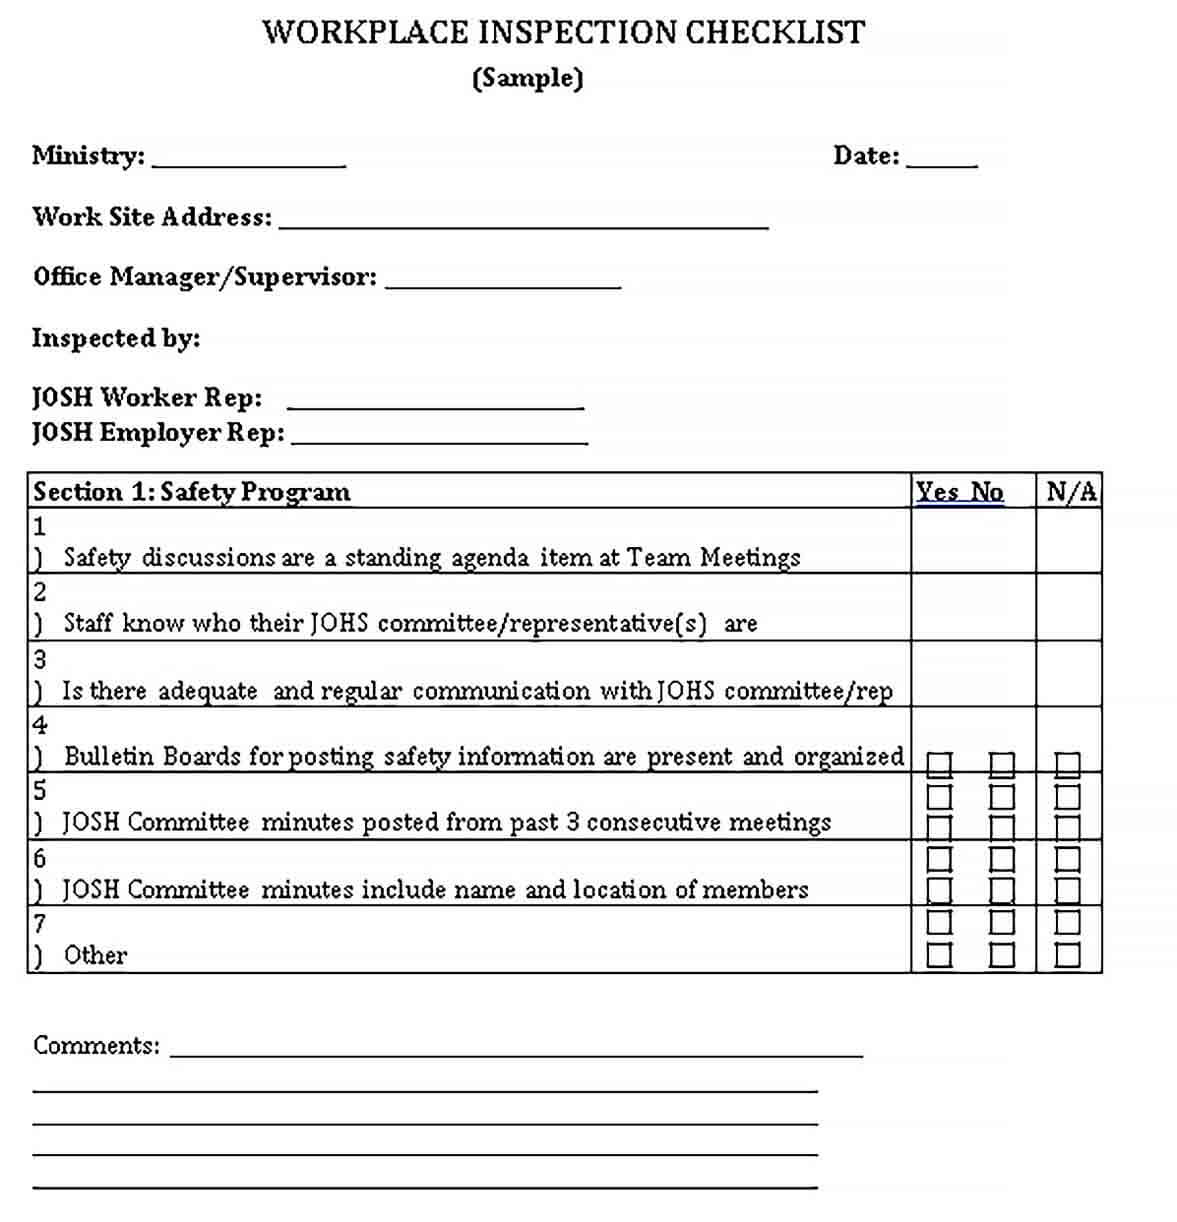 Sample Workplace Safety Inspection Checklist Template